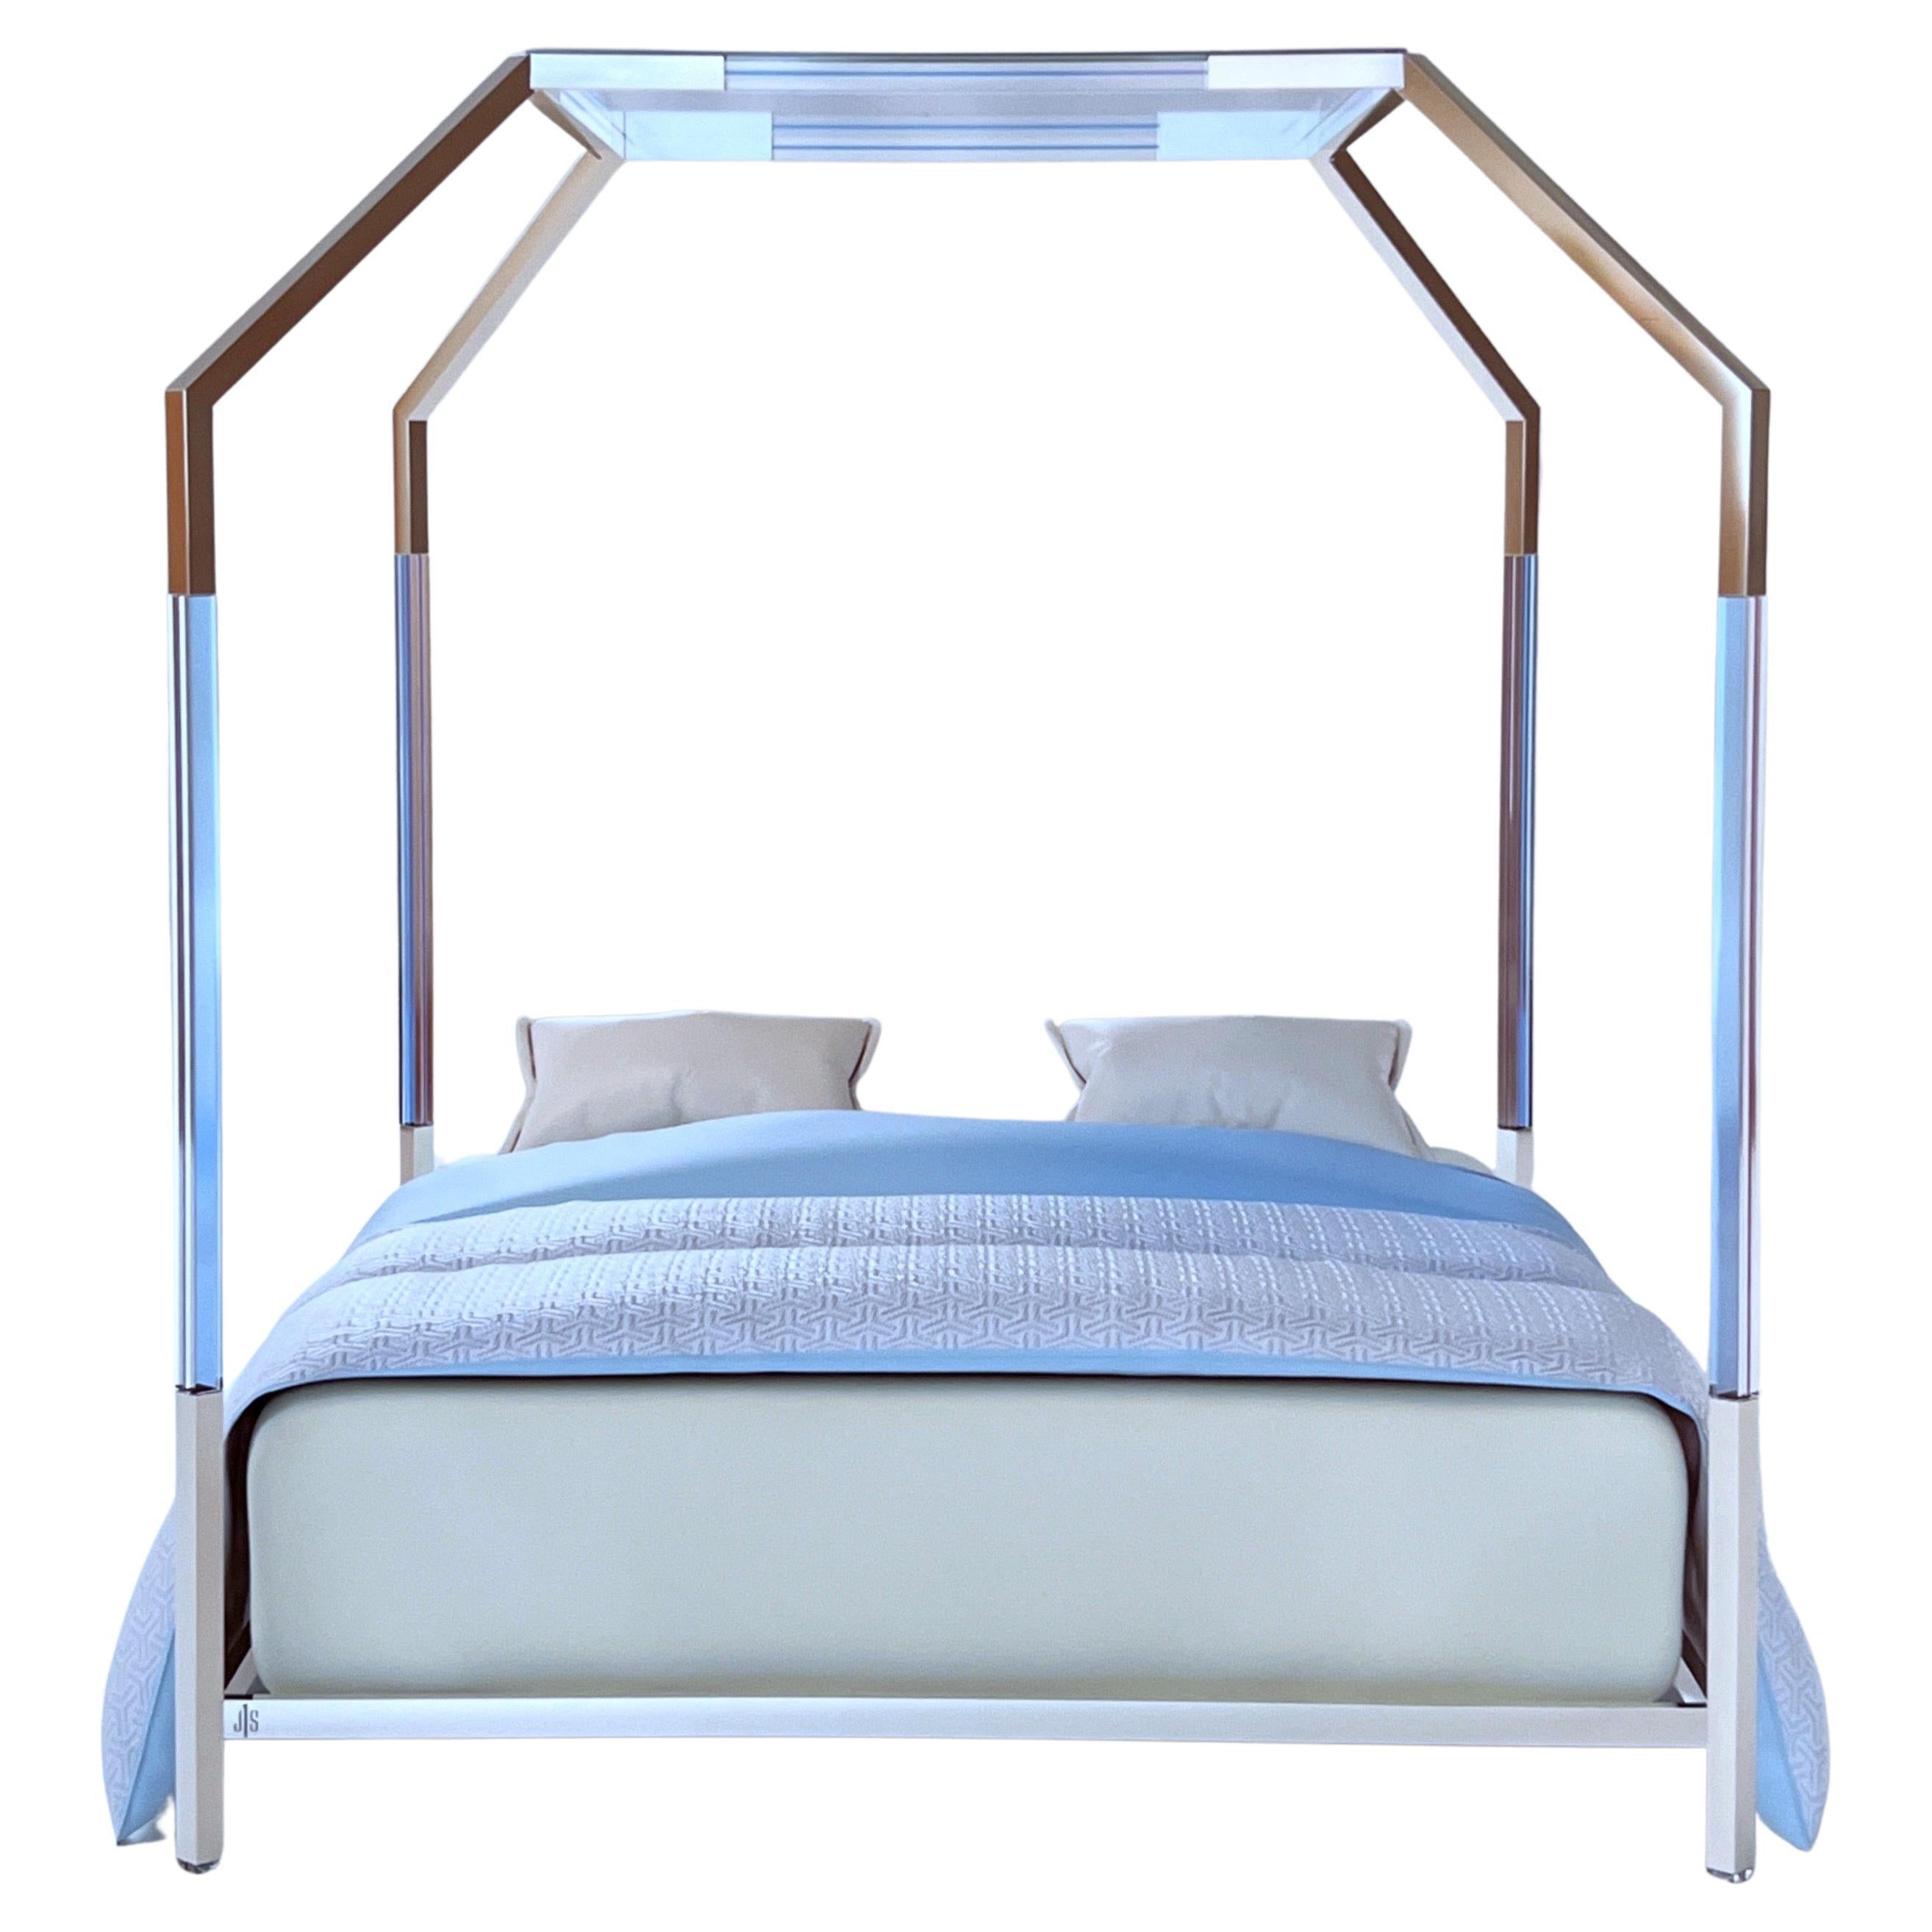 Studio Lucite and Nickel Limited Edition King Size Bed by Charles Hollis Jones